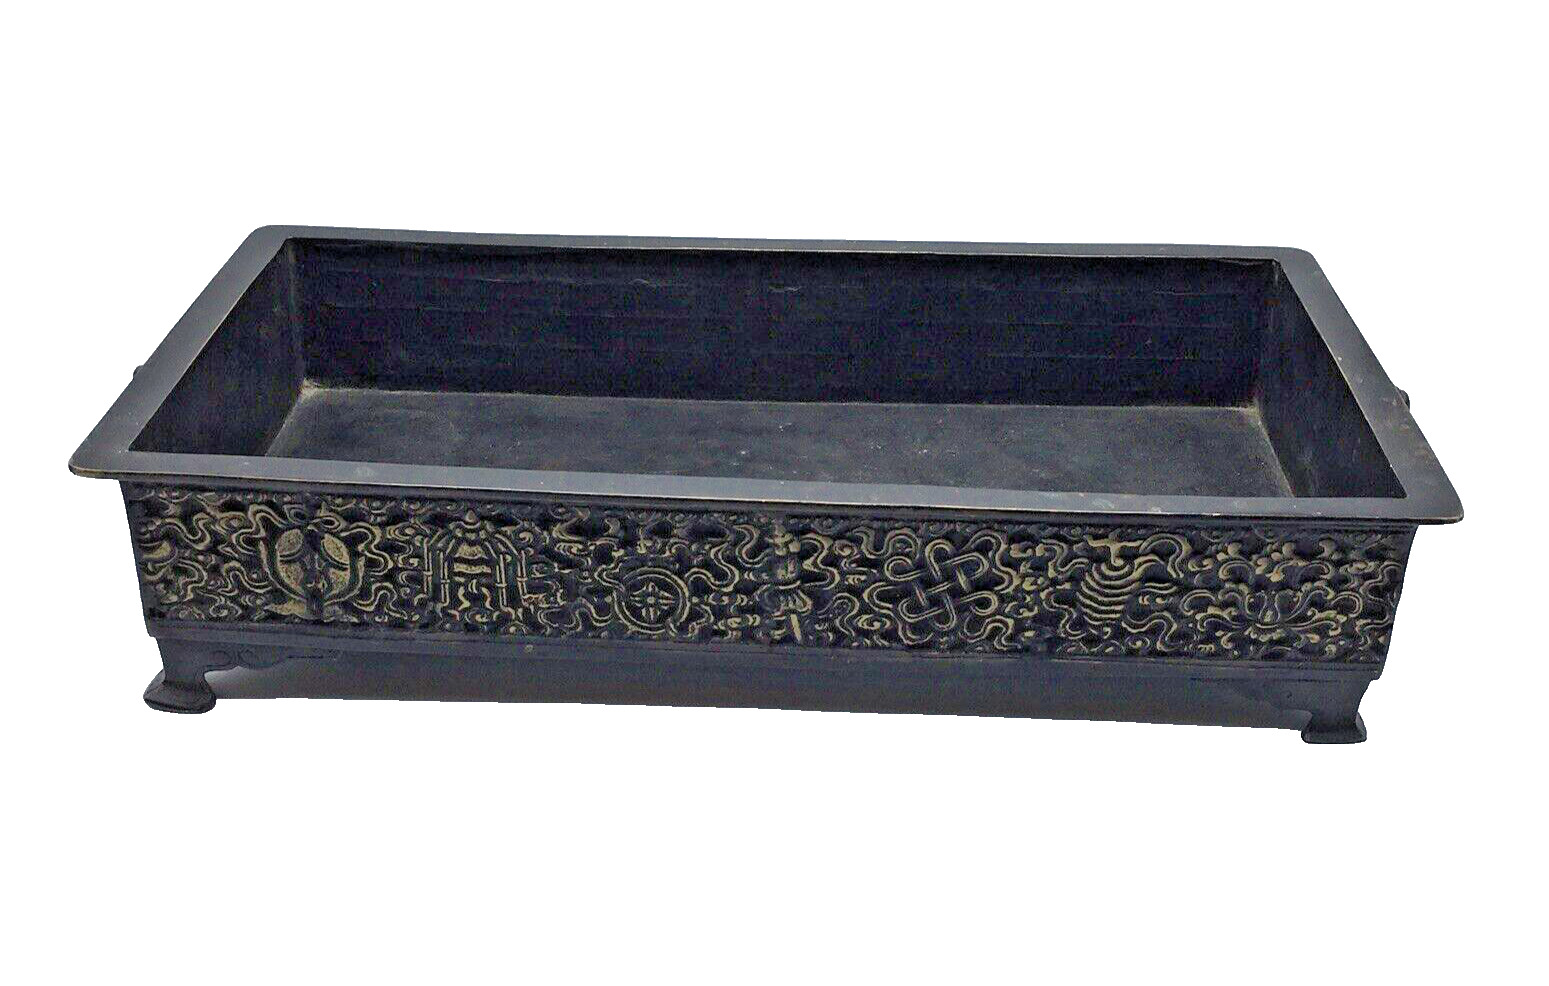 Japanese Signed Bronze Footed Bonsai Planter Tray Suiban w/ Elephant Handles